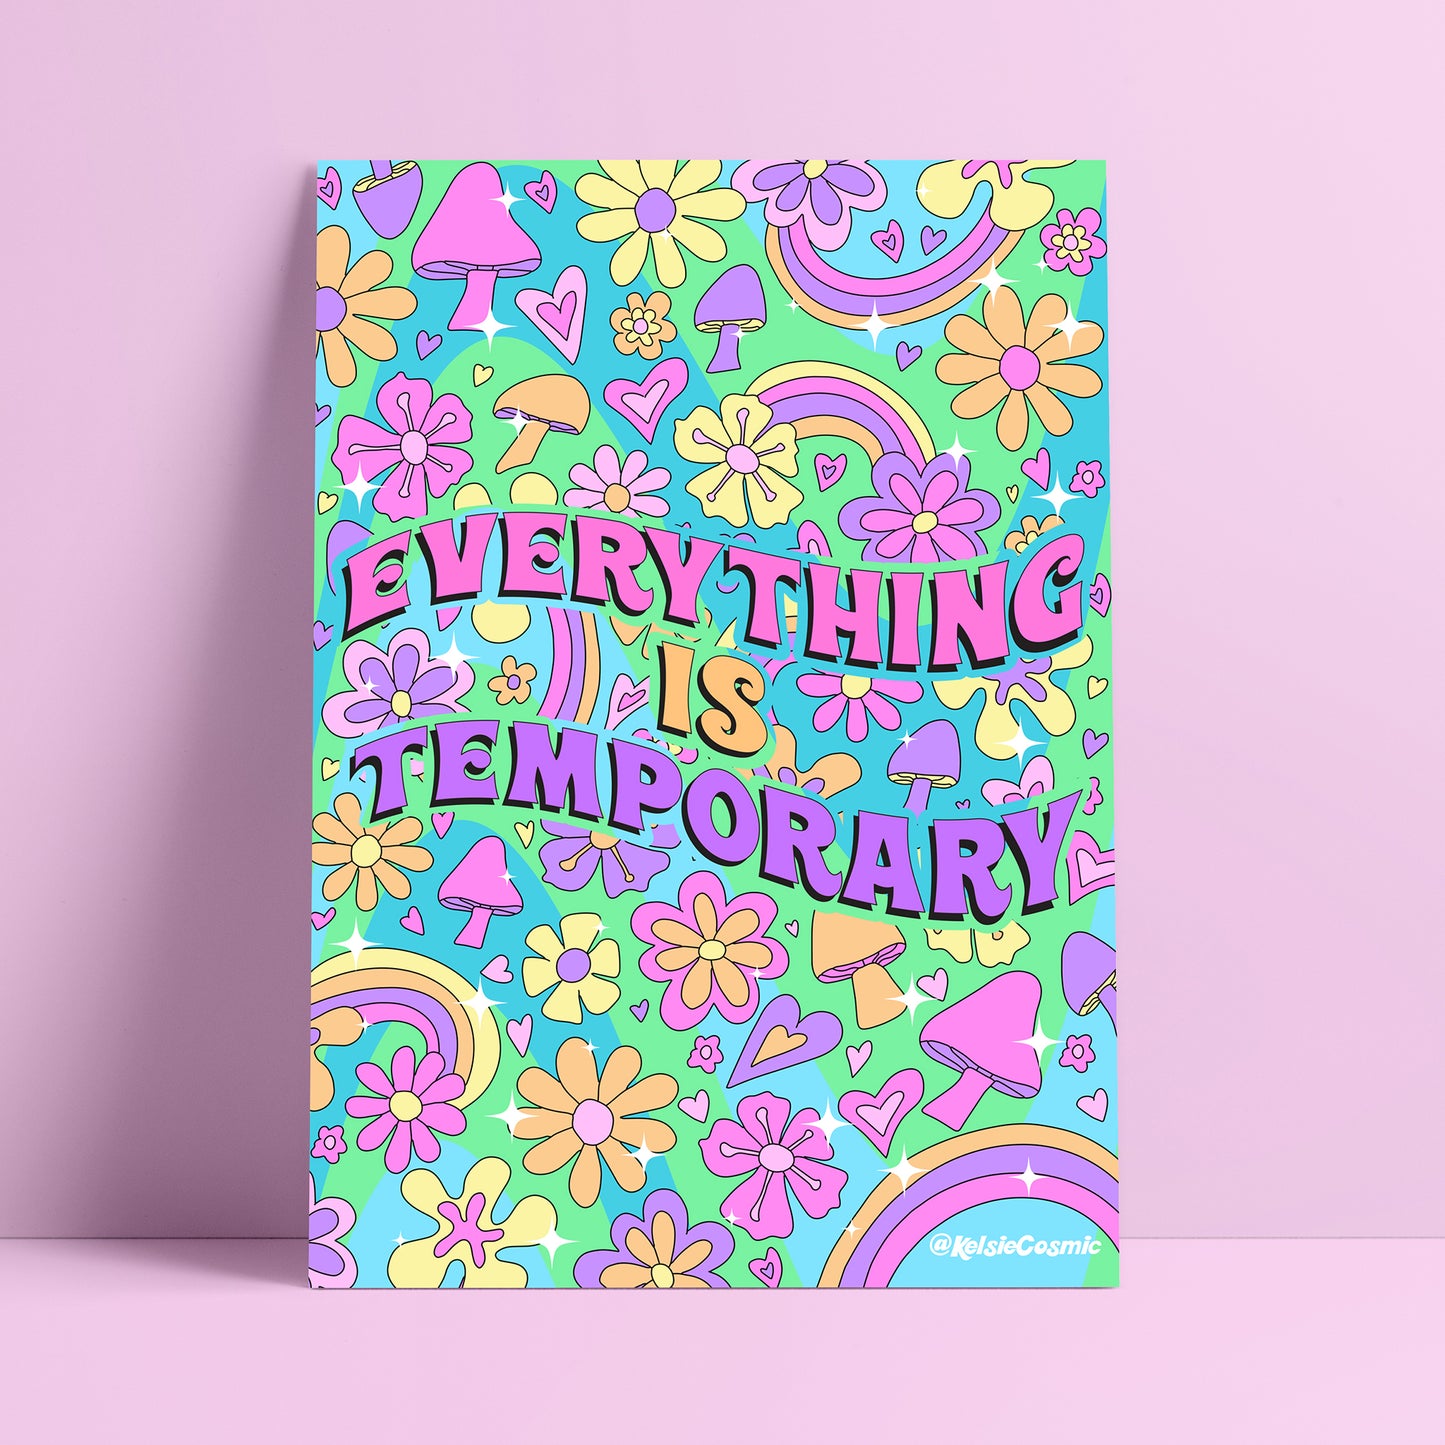 Everything is Temporary Art Print